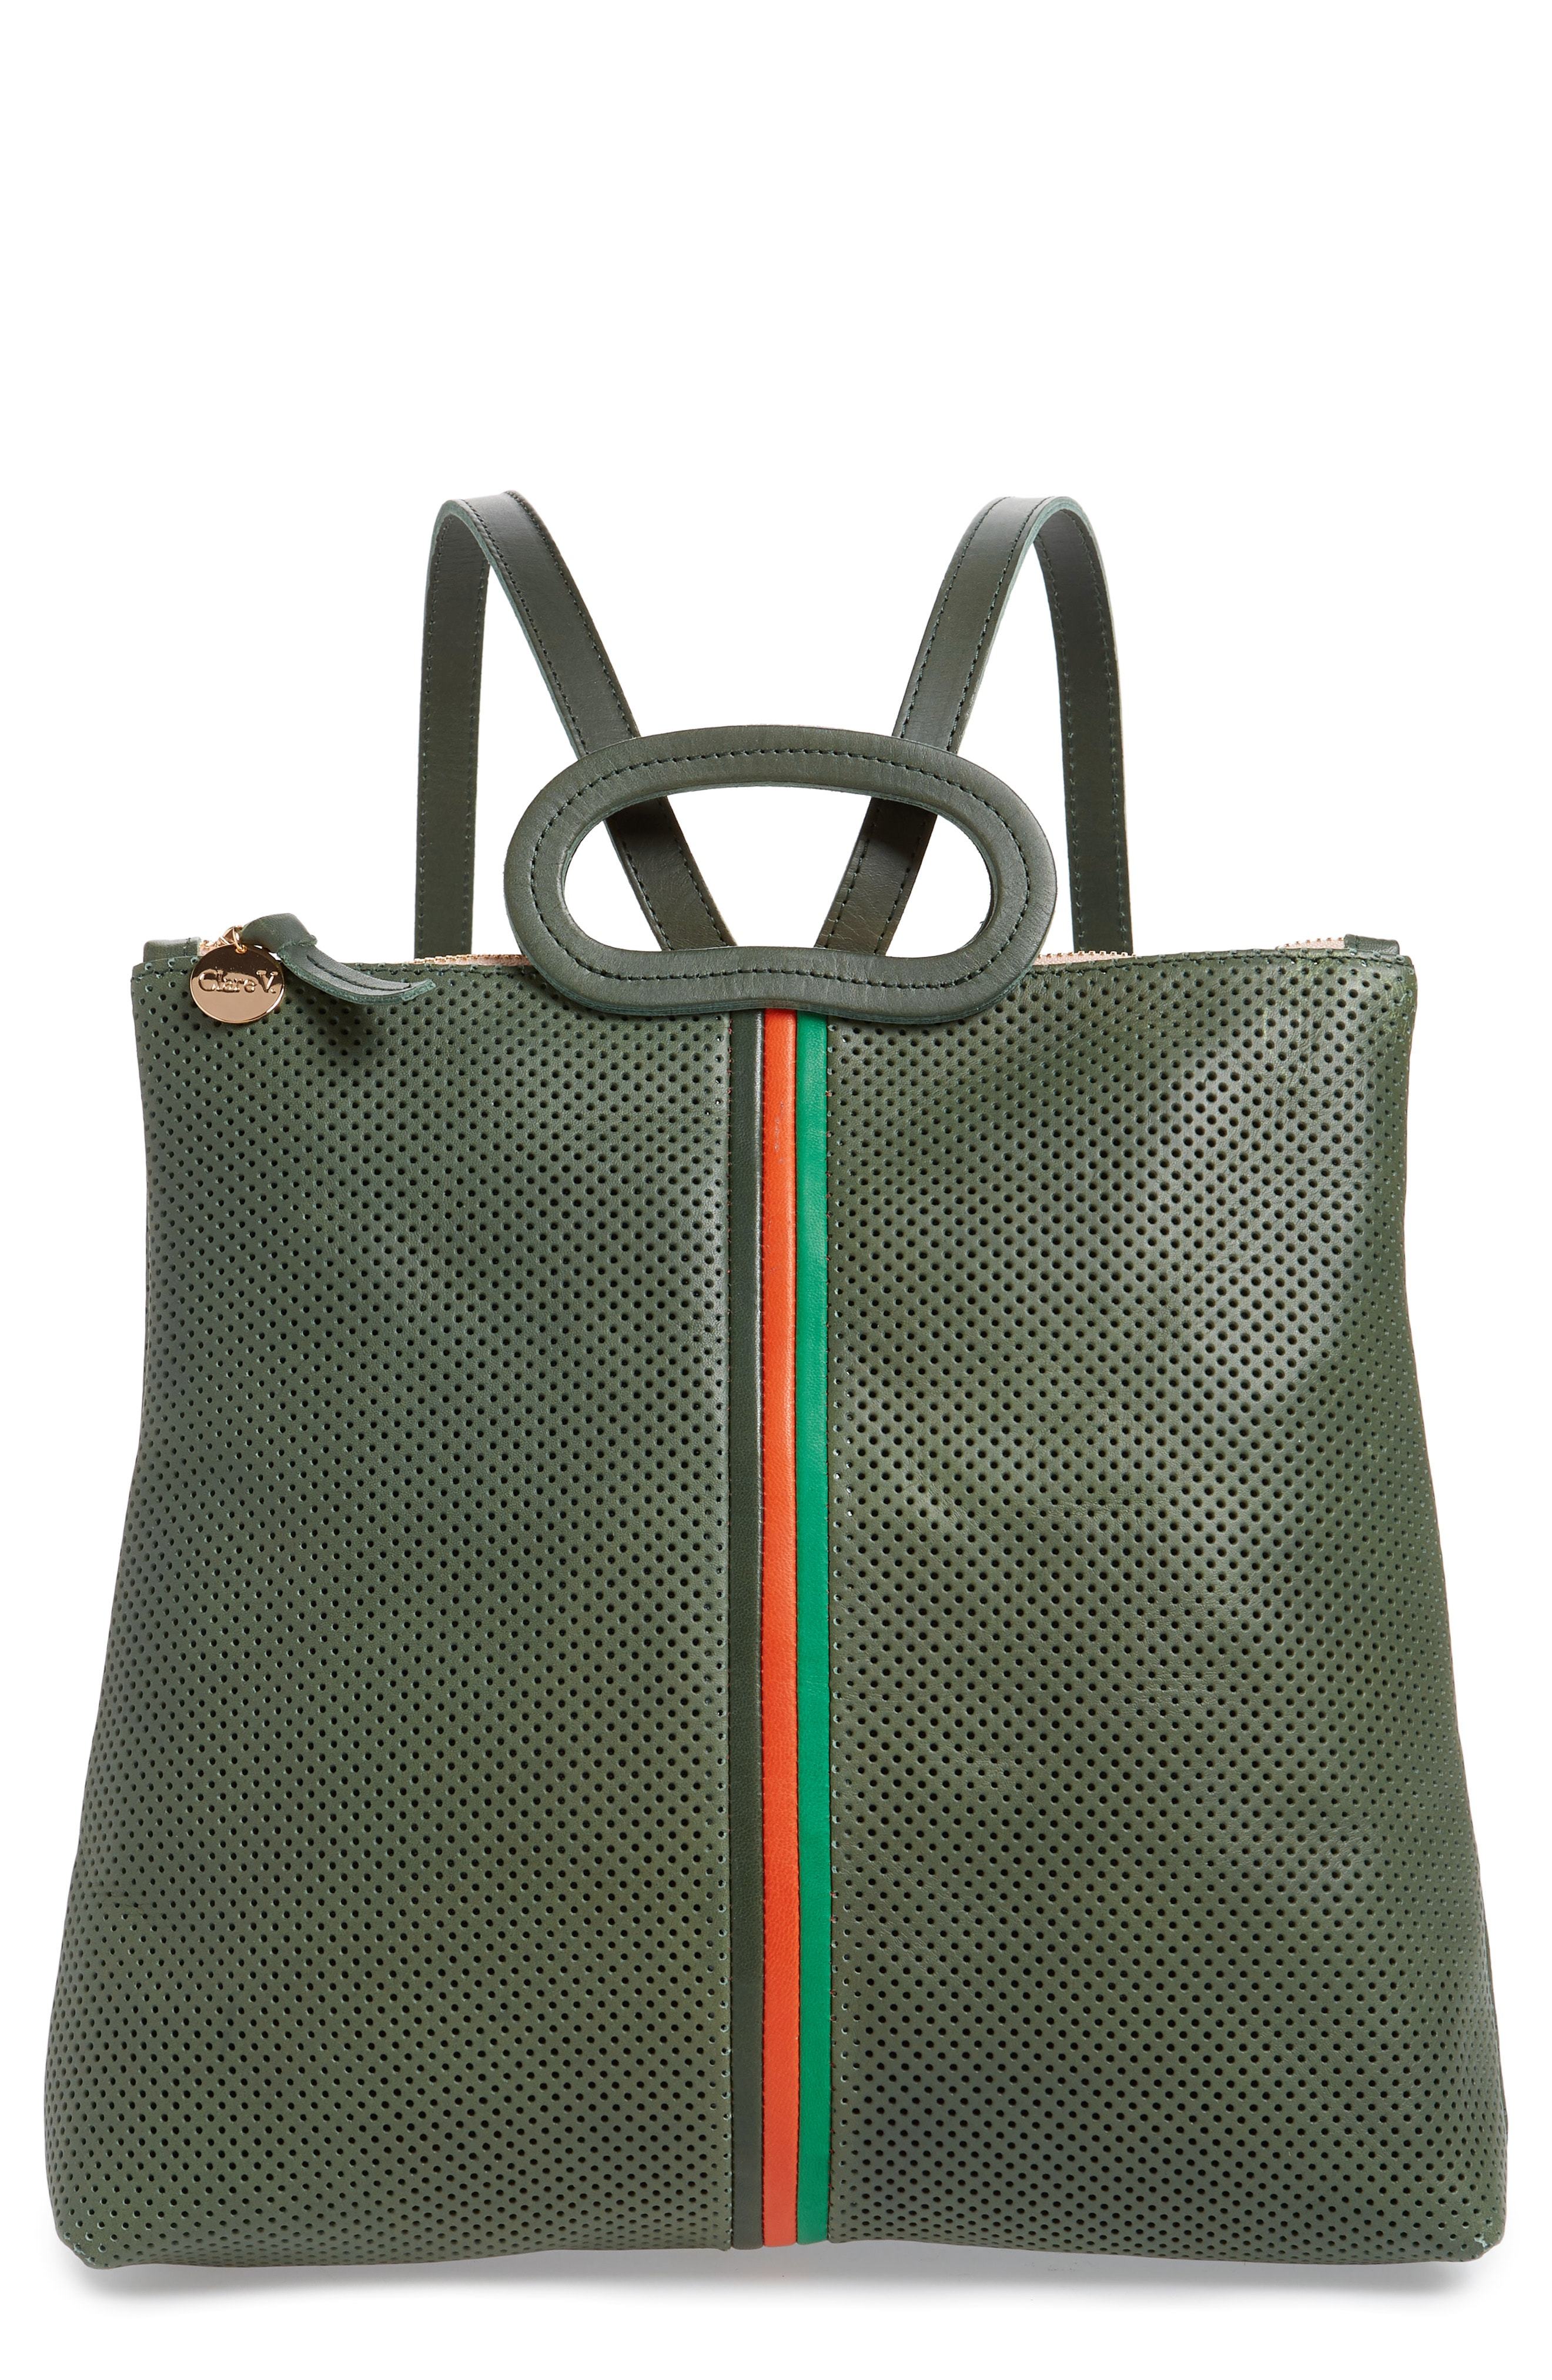 Clare V. Marcelle Perforated Leather Backpack, $399